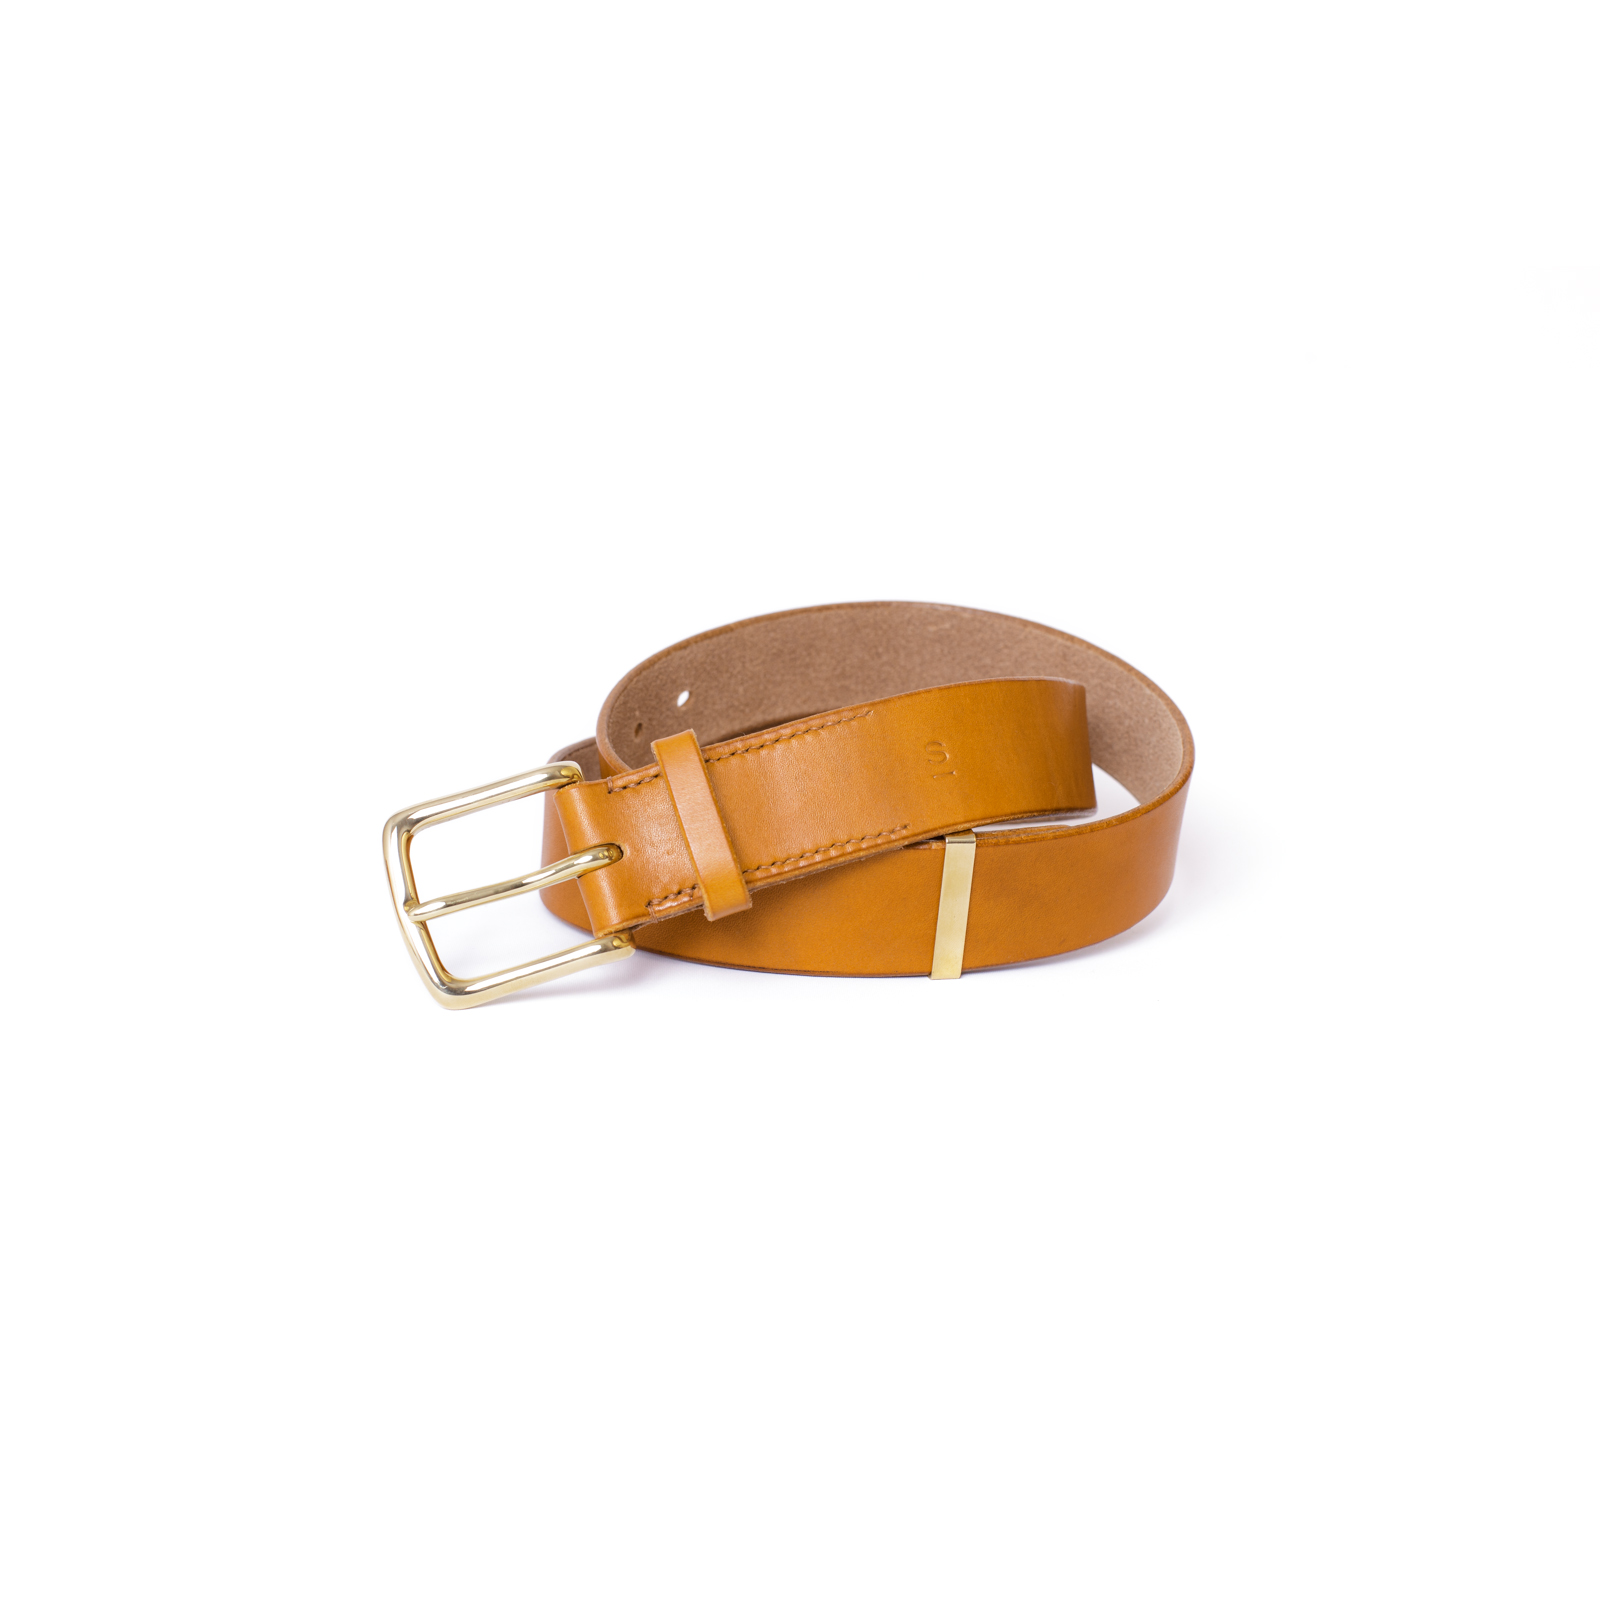 Hand crafted hand stitched London Tan colour color english bridle leather belt with solid brass Westend English buckle, luxury goods heirloom Morris Belt Simeon Morris